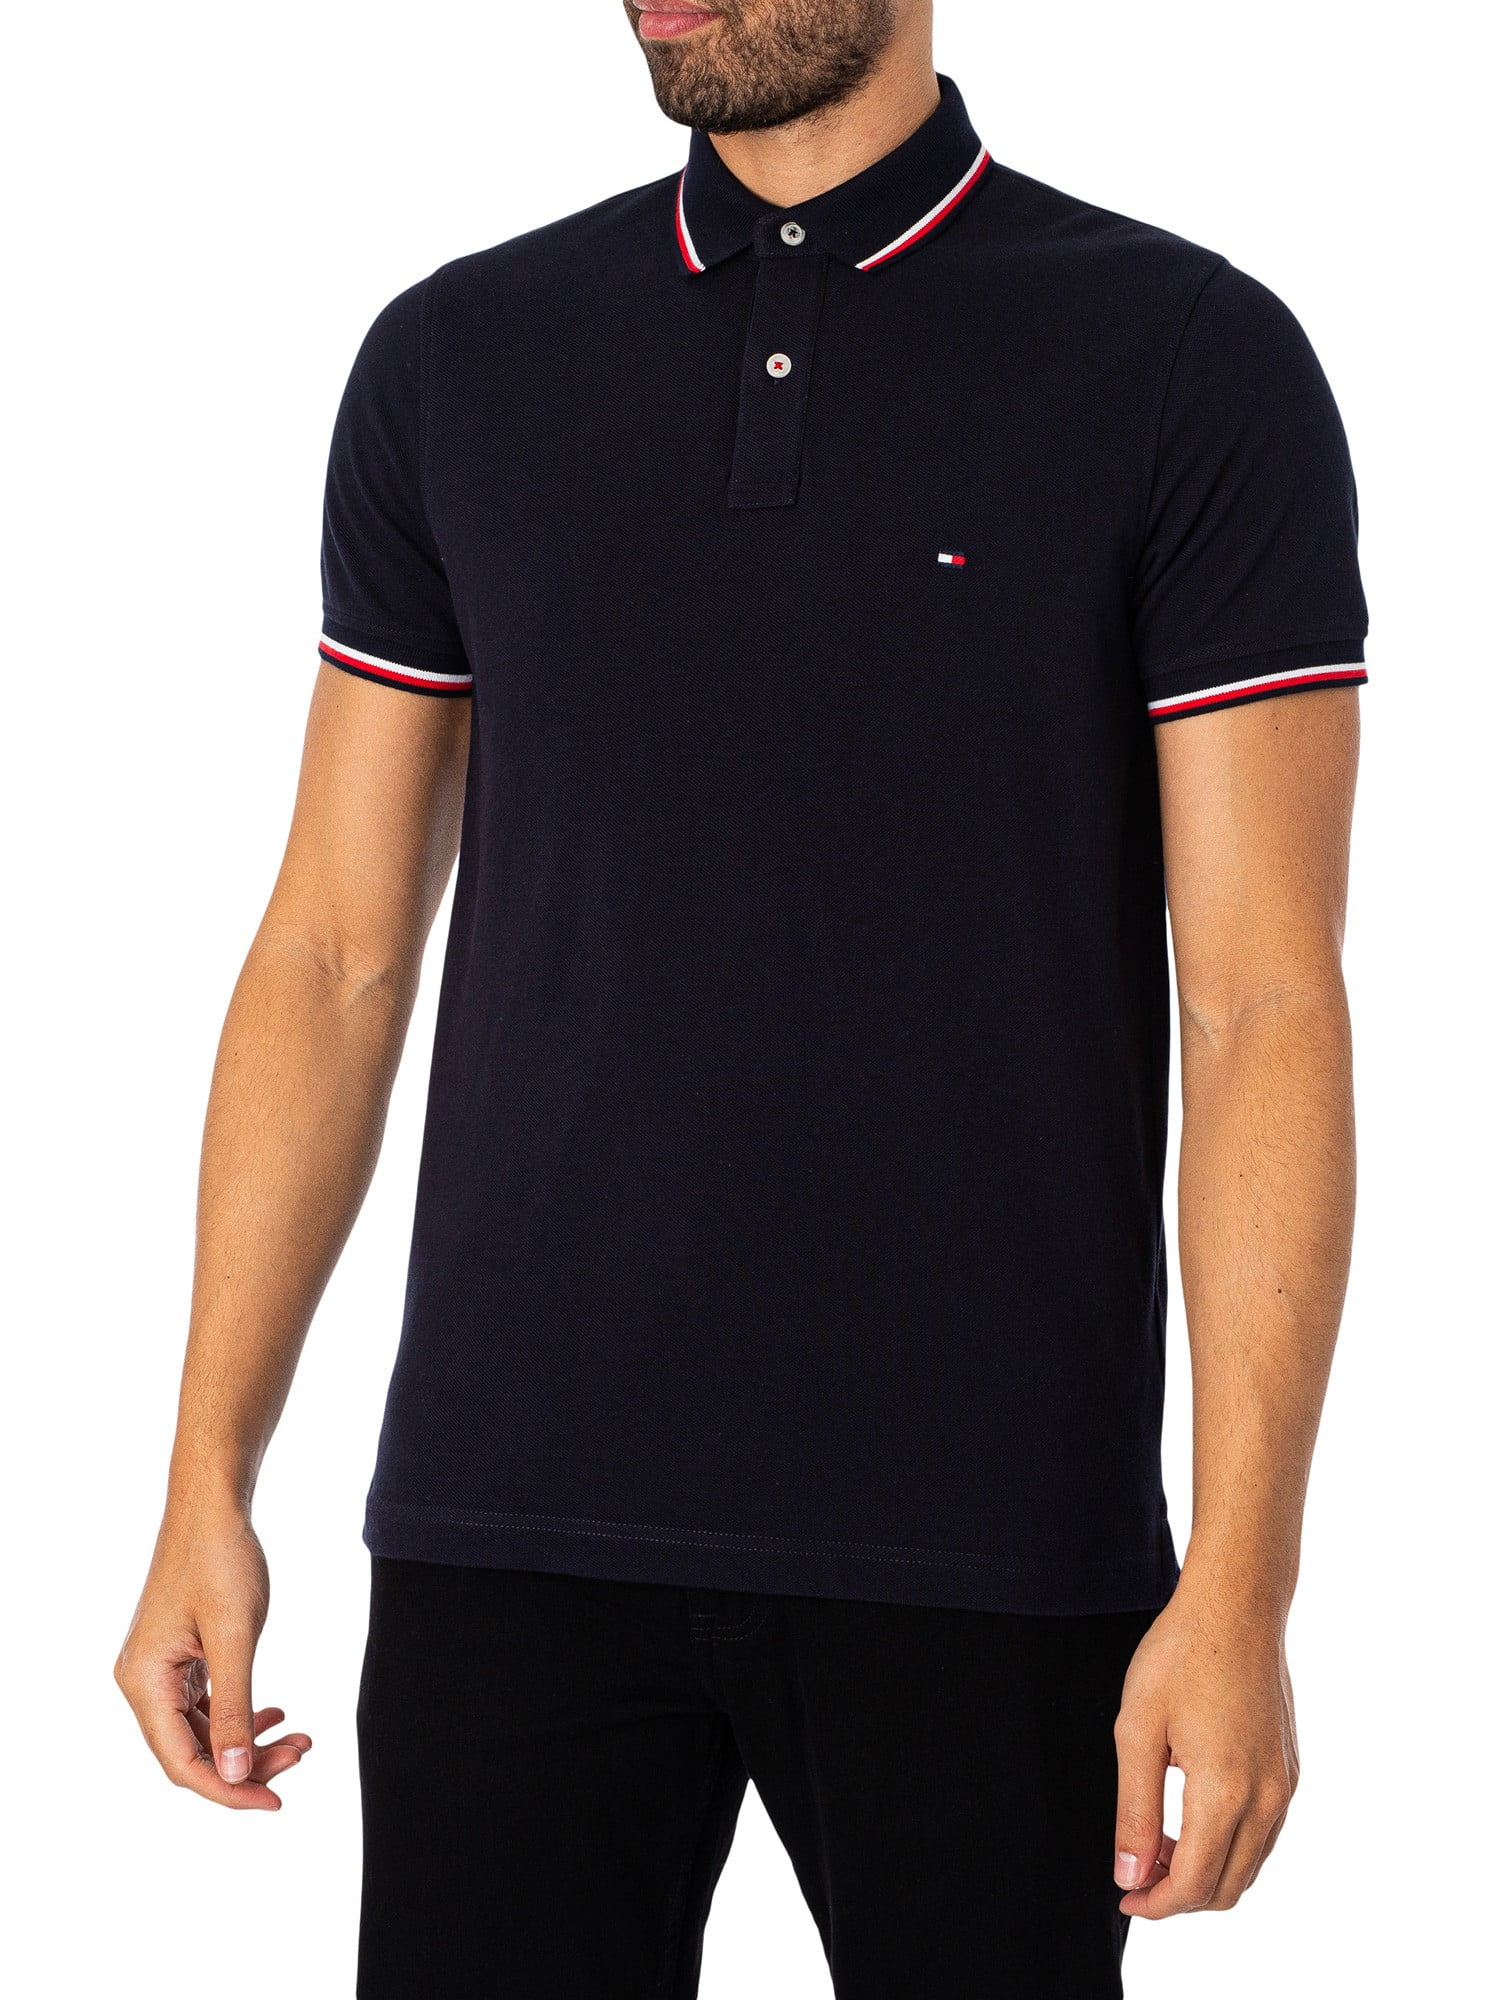 Tipped Slim Blue Polo Core Tommy Hilfiger Shirt,